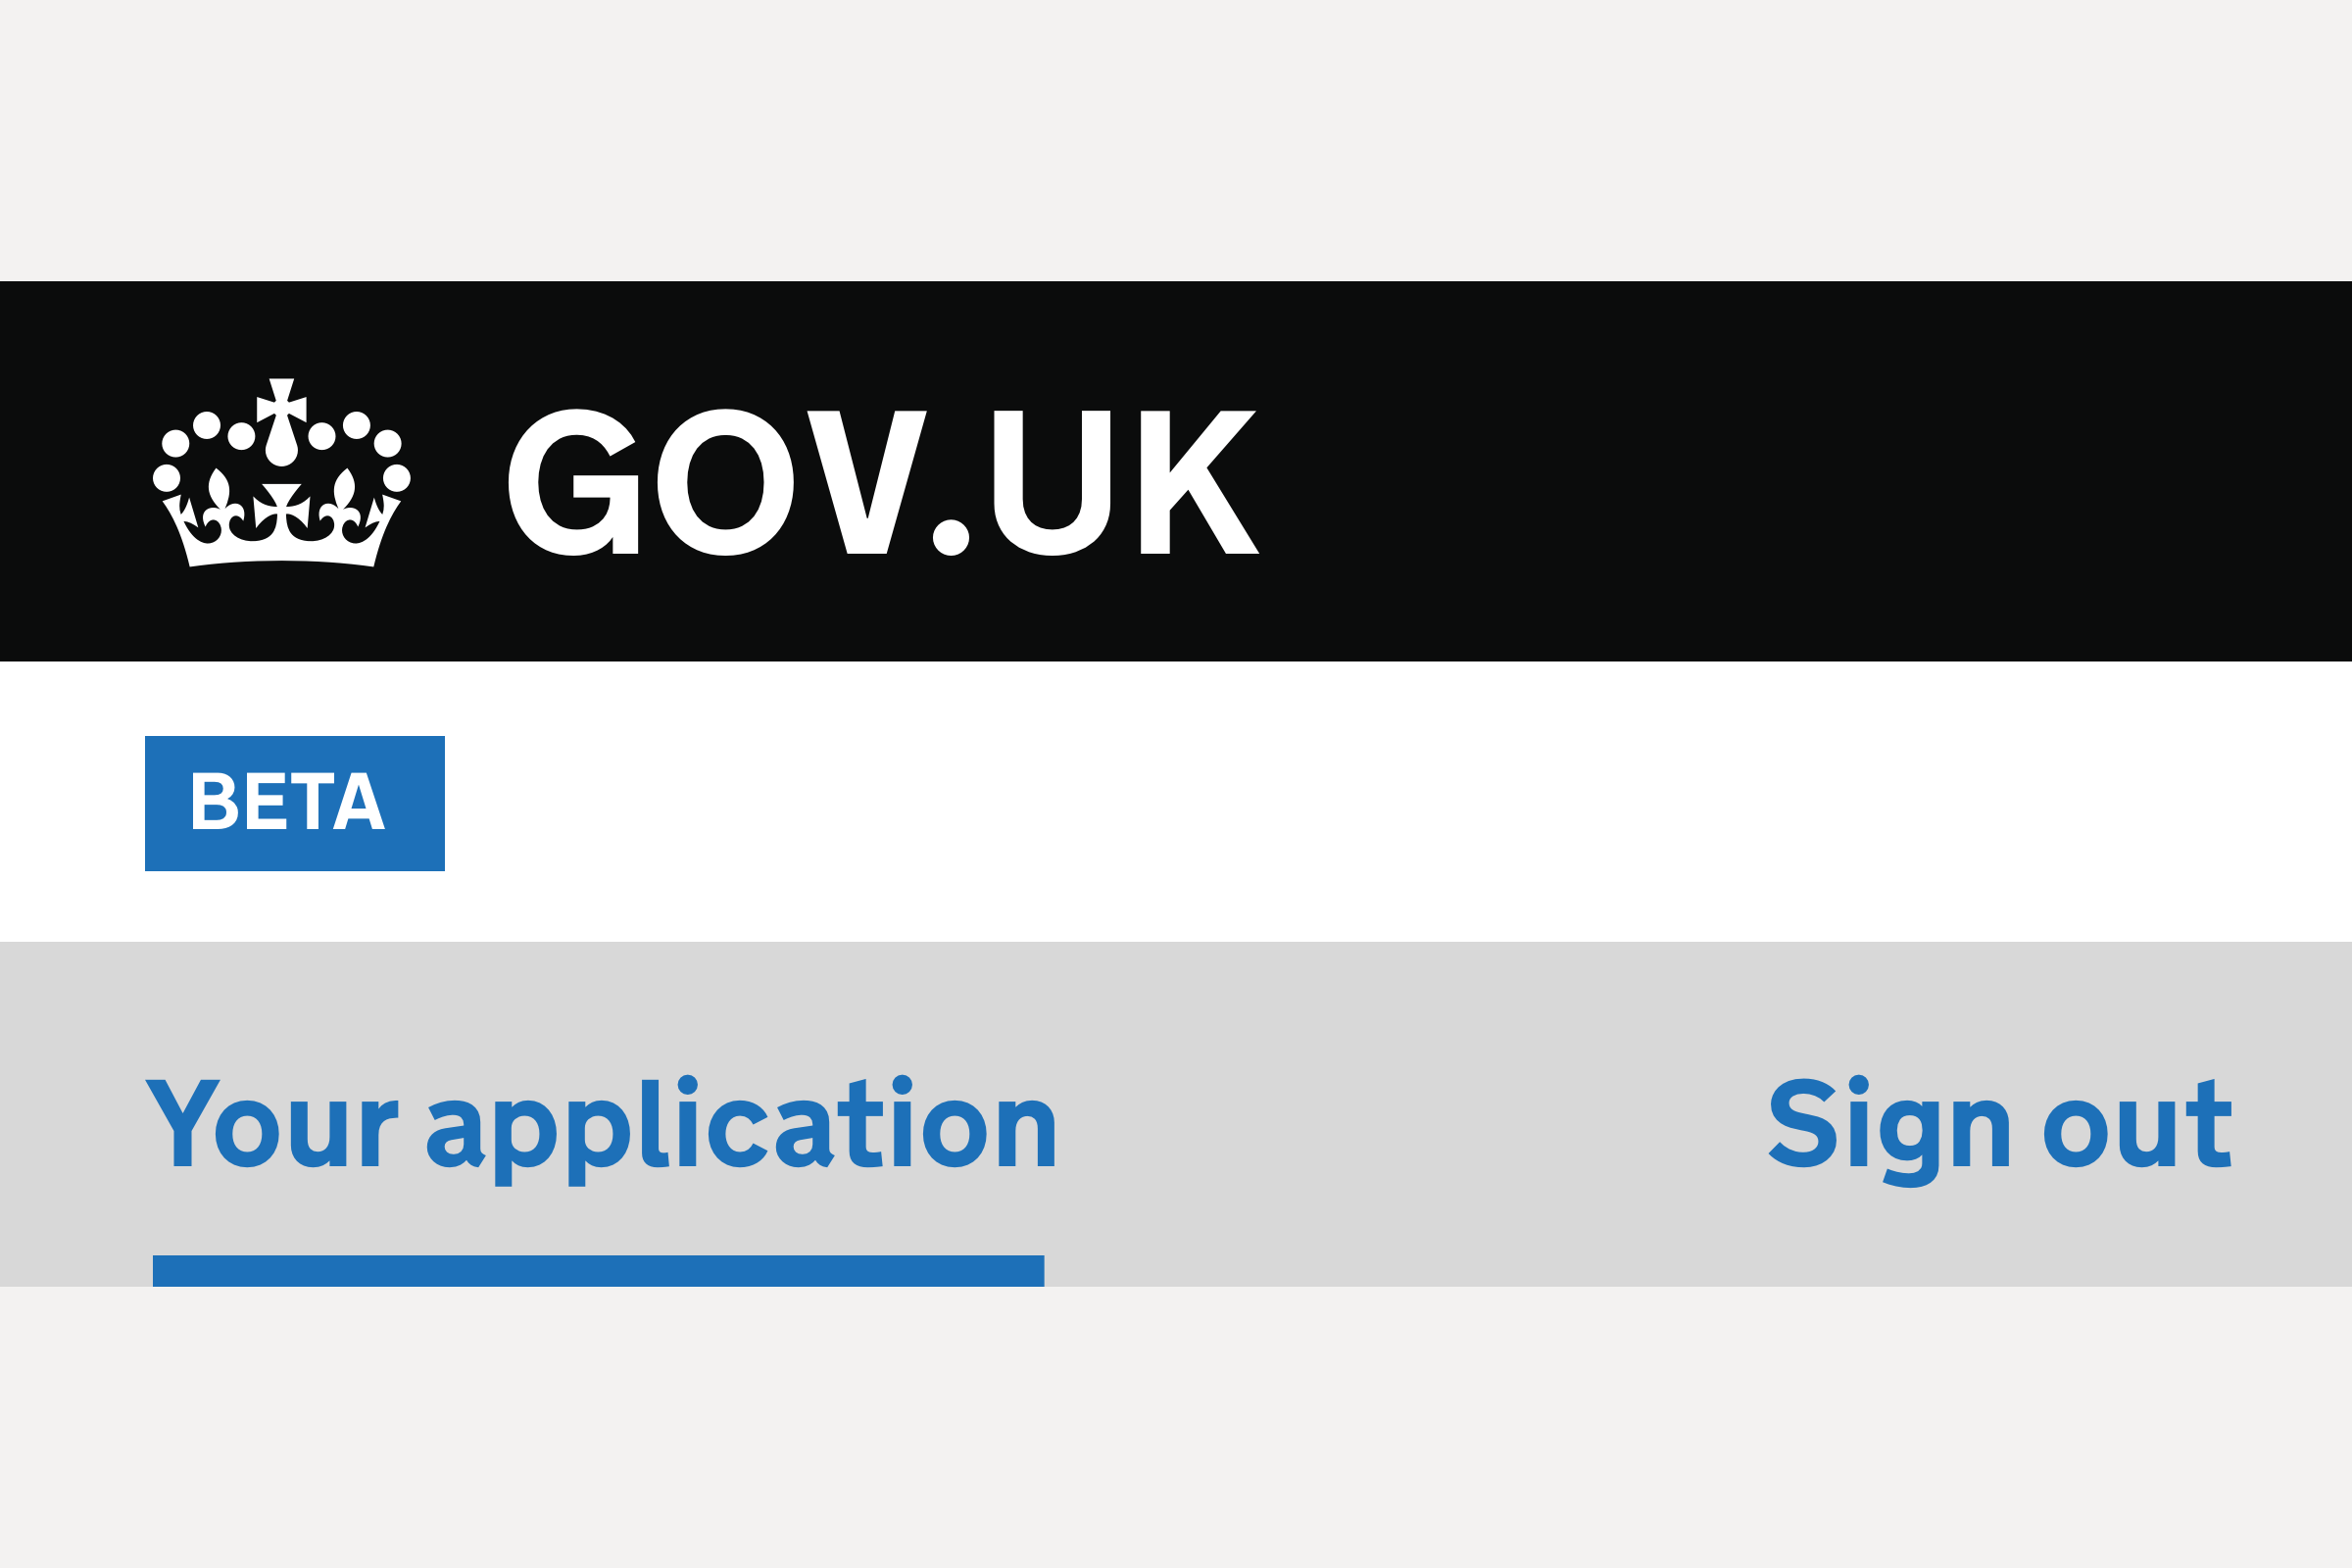 Illustration showing 3 horizontal elements: a bar with a black background and a crown and GOV.UK in white, a bar with a white background and a blue 'BETA' badge, and a bar with a grey background and 'Your applications' and 'Sign out' links in blue text.